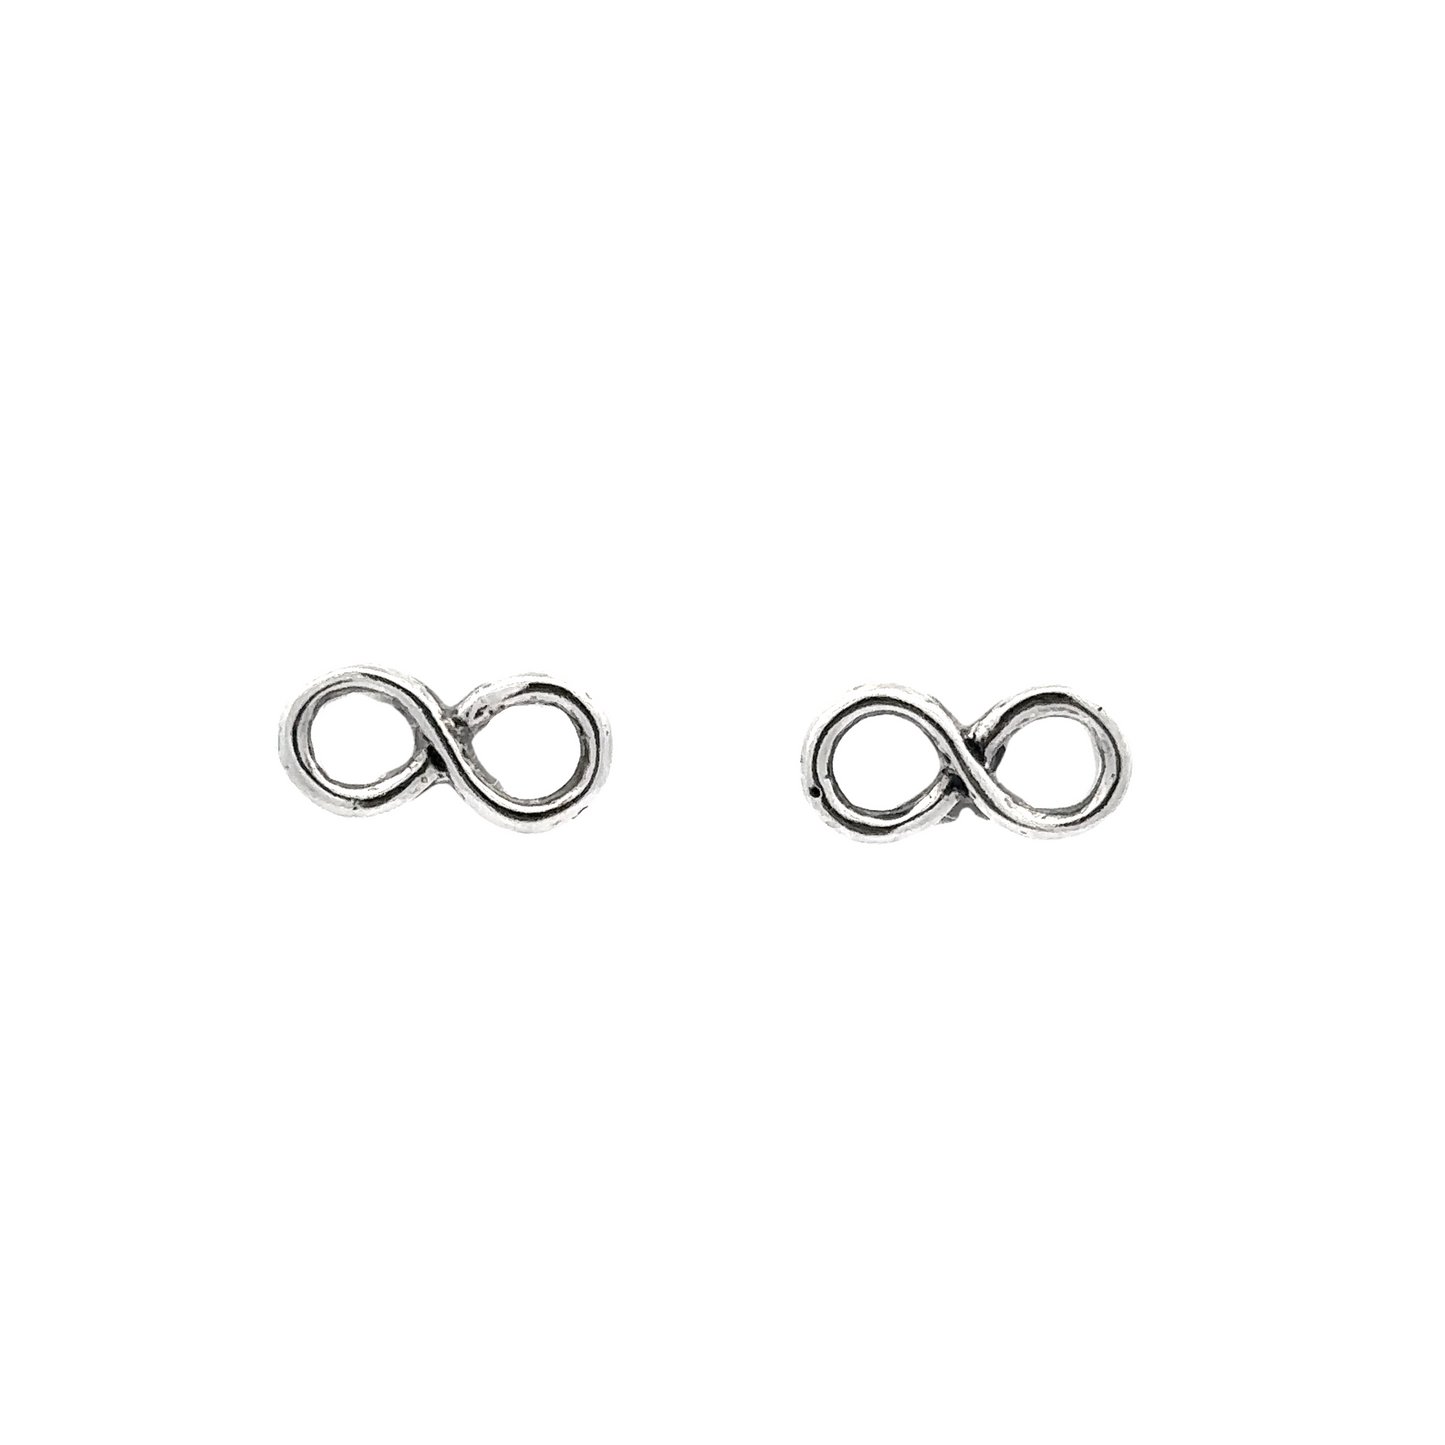 A pair of minimalist Infinity Sign Studs.